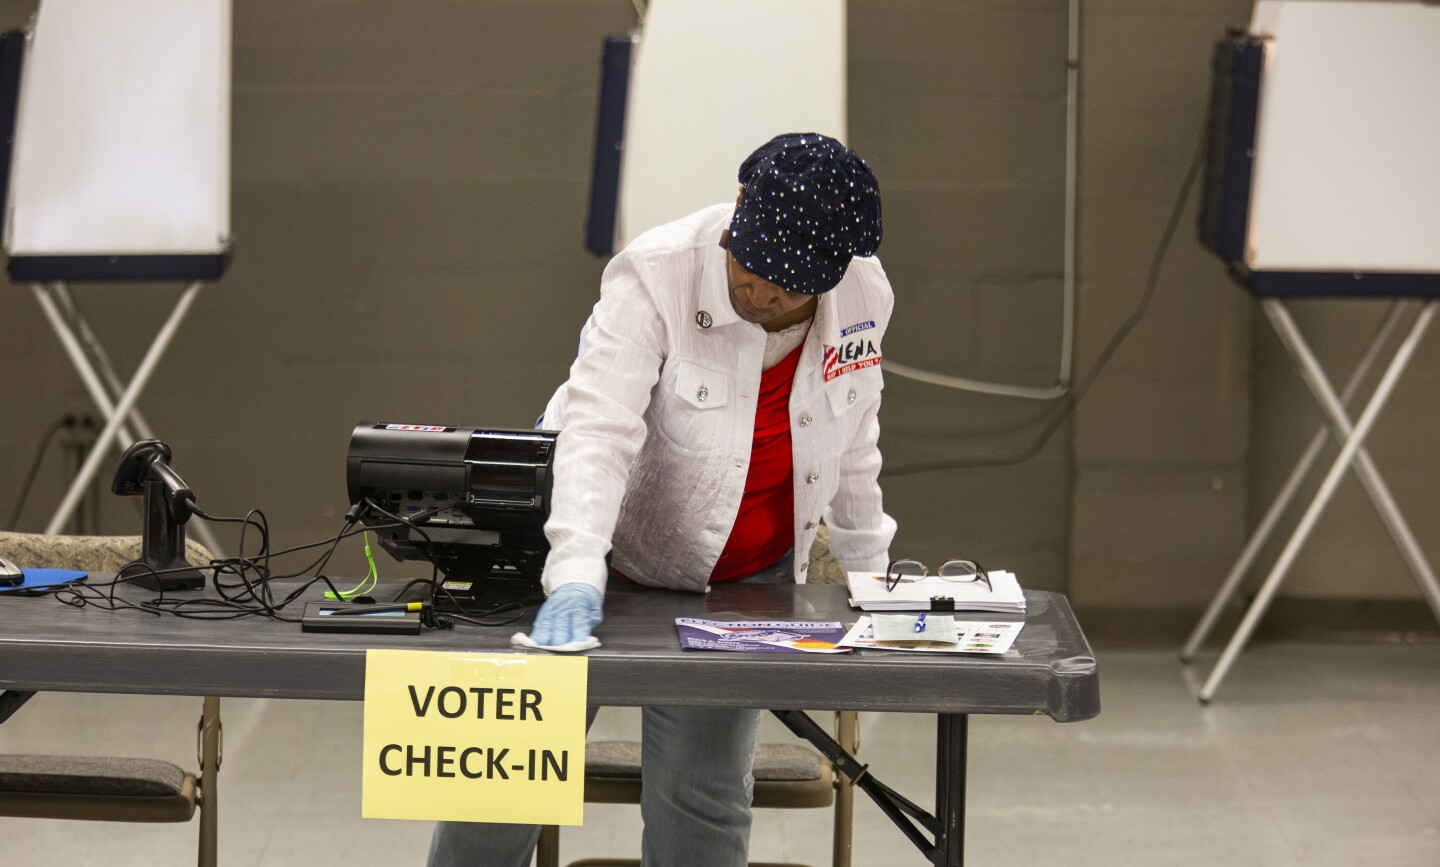 Leon County, Florida poll worker Lena Simmonds wipes up a voter check-in counter while waiting on voters to arrive on March 17, 2020 in Tallahassee, Florida.